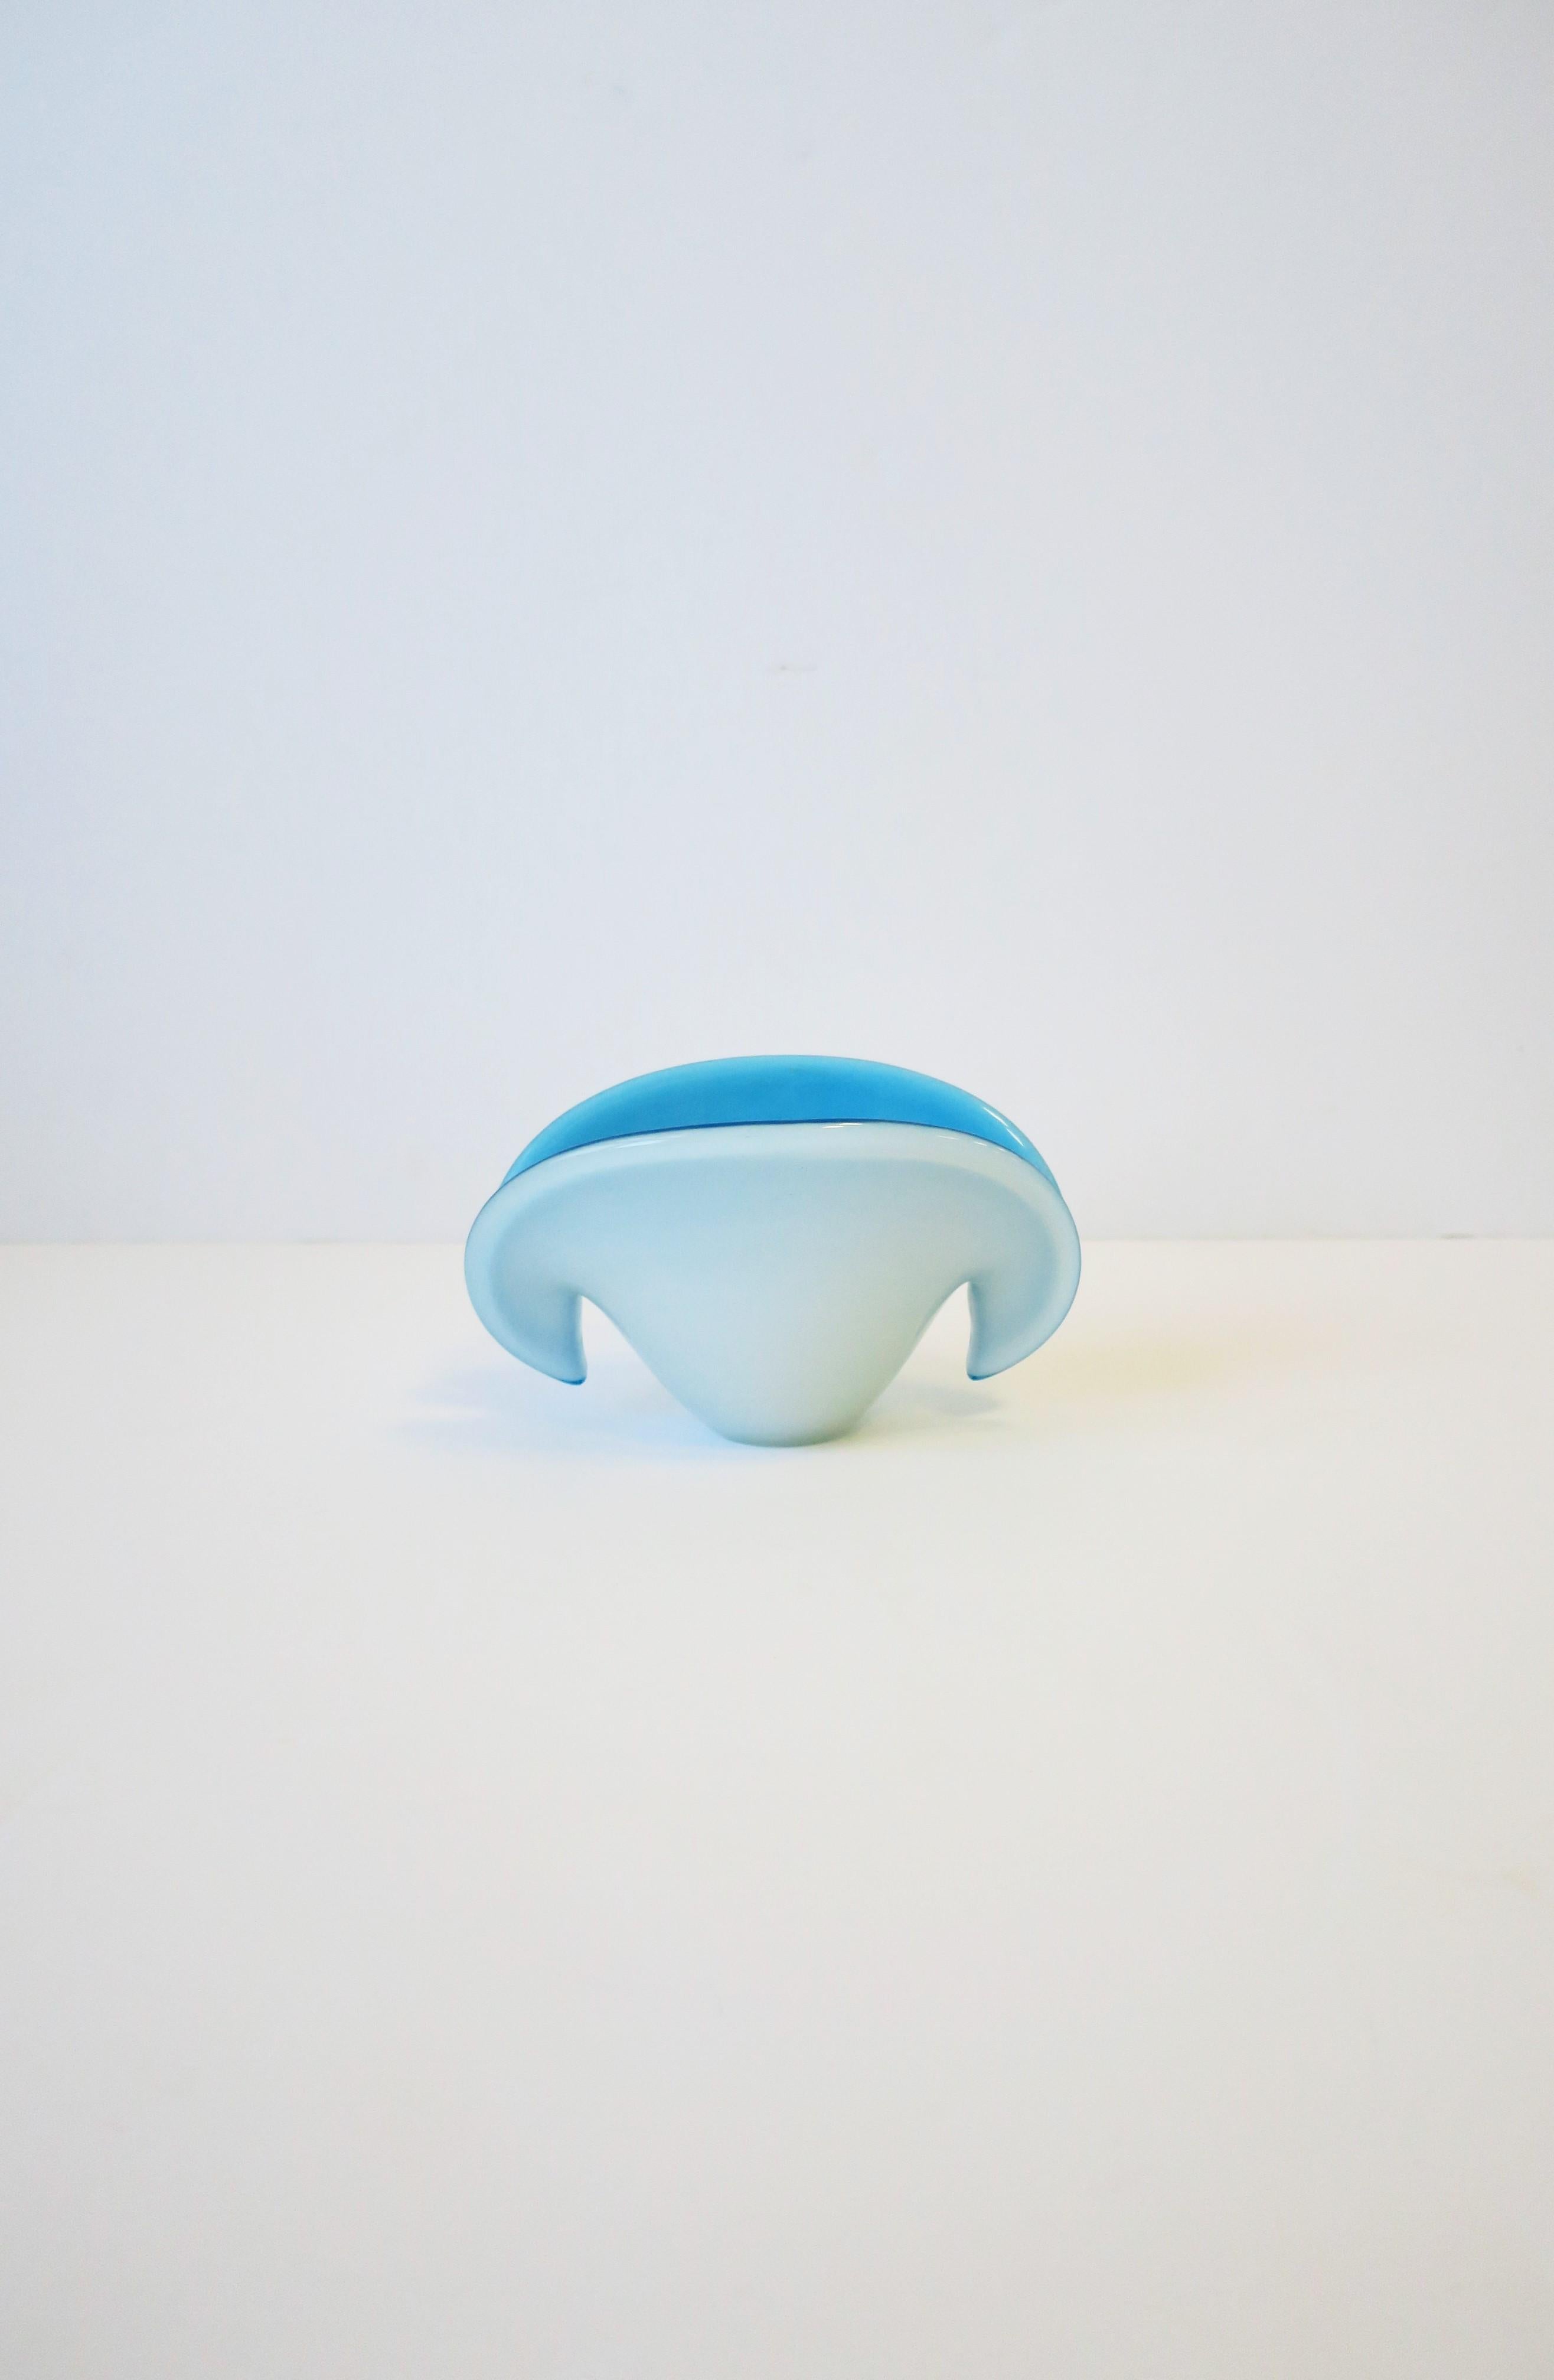 A beautiful white over azure blue (sky blue) Italian Murano art glass conch seashell bowl or vase vessel, Midcentury Modern period, circa mid-20th century, Italy. Piece can work well as a standalone object, vase or as a vide-poche (catch-all), as